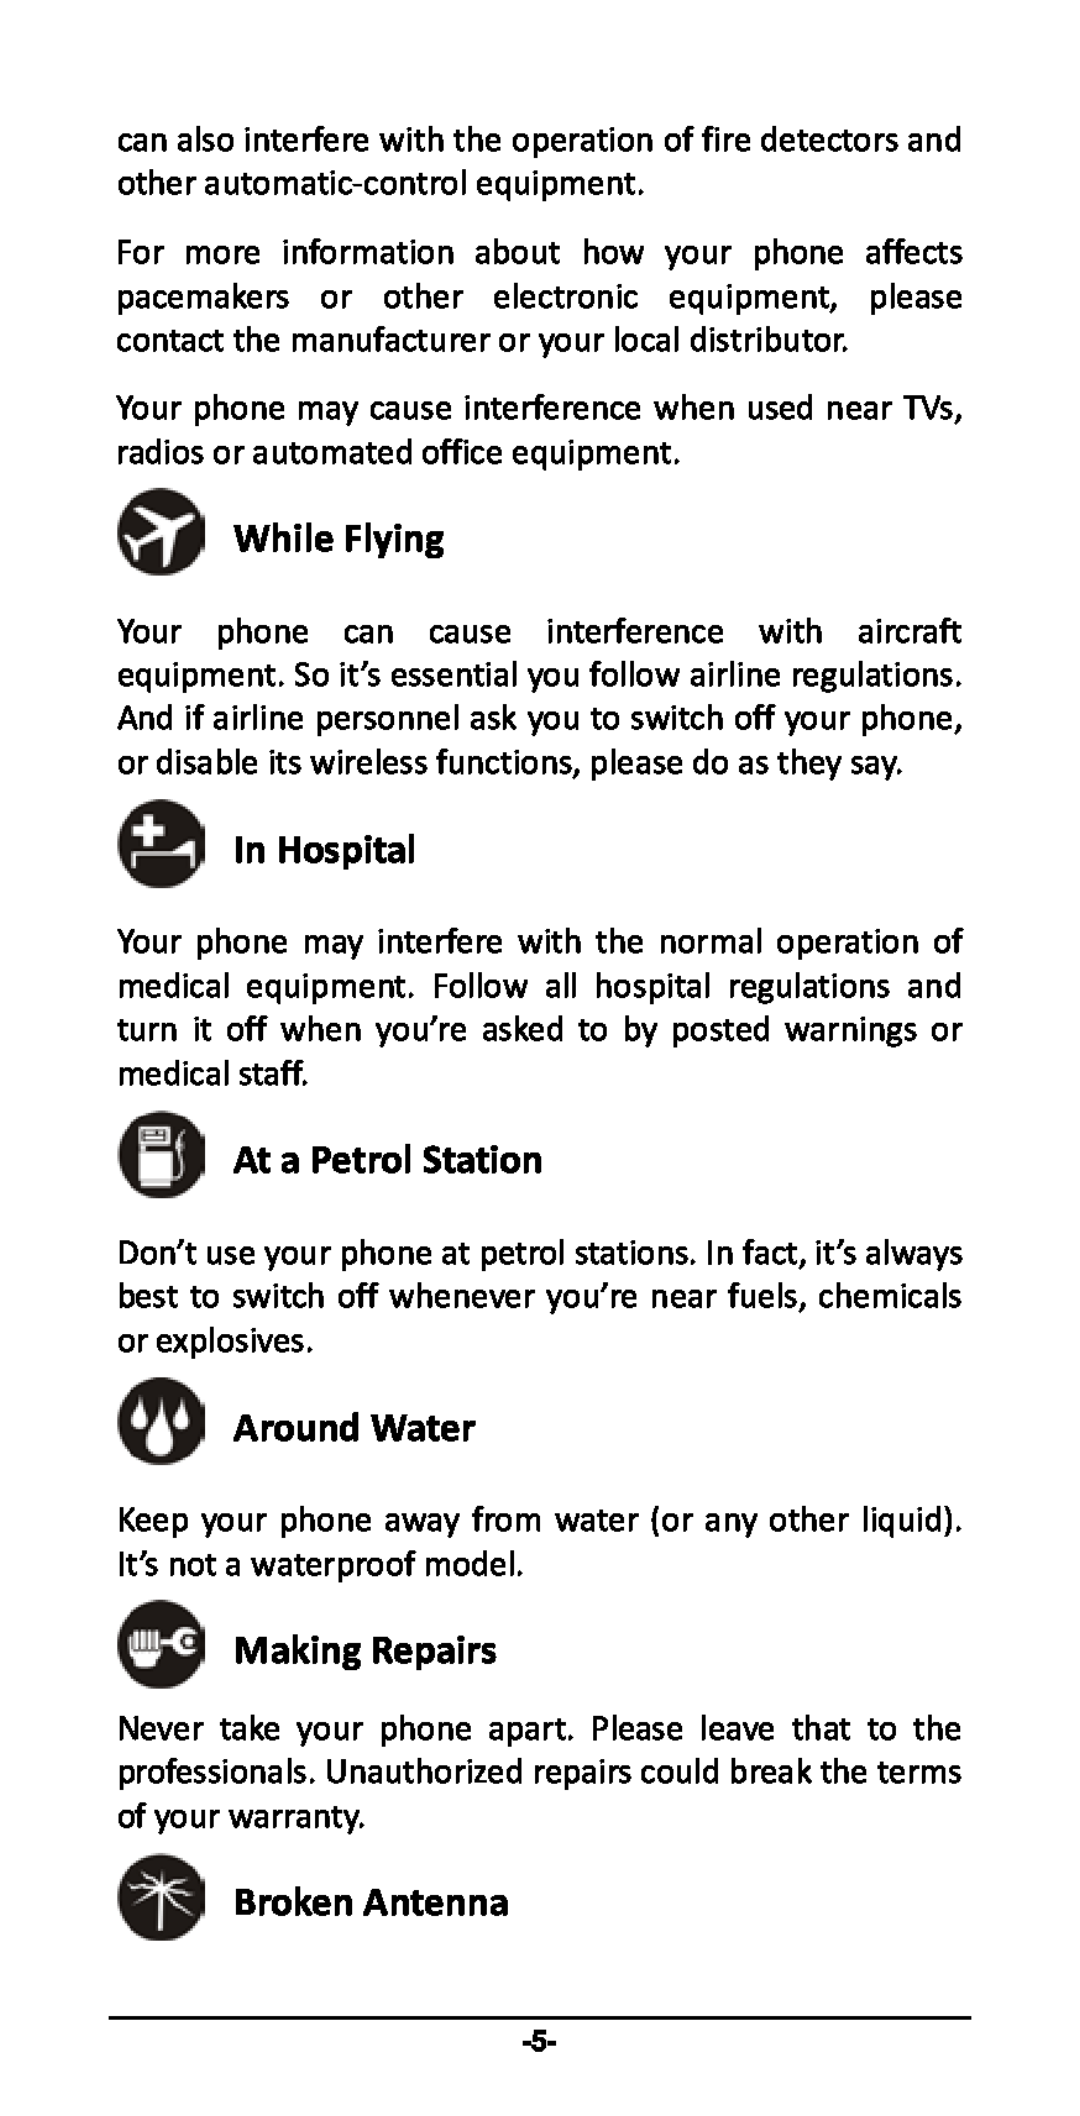 Haier P-867 user manual While Flying, In Hospital, At a Petrol Station, Around Water, Making Repairs, Broken Antenna 